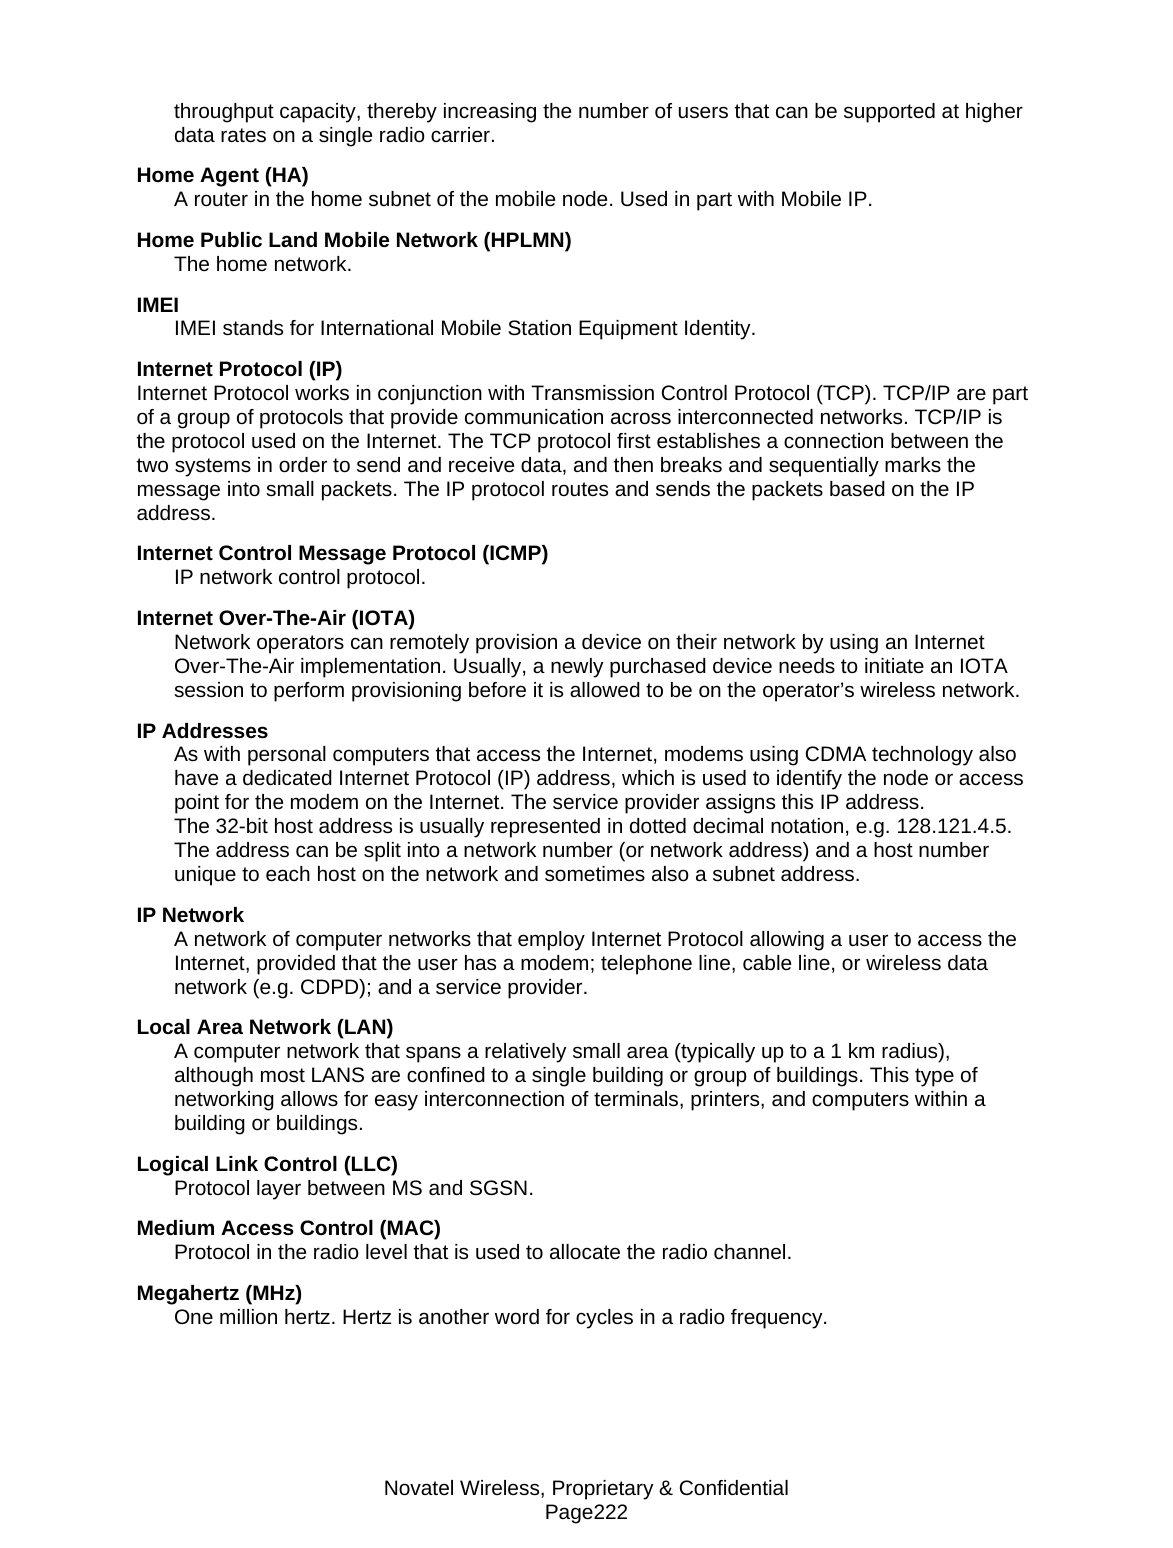 Novatel Wireless, Proprietary &amp; Confidential Page222 throughput capacity, thereby increasing the number of users that can be supported at higher data rates on a single radio carrier. Home Agent (HA) A router in the home subnet of the mobile node. Used in part with Mobile IP. Home Public Land Mobile Network (HPLMN) The home network. IMEI IMEI stands for International Mobile Station Equipment Identity. Internet Protocol (IP) Internet Protocol works in conjunction with Transmission Control Protocol (TCP). TCP/IP are part of a group of protocols that provide communication across interconnected networks. TCP/IP is the protocol used on the Internet. The TCP protocol first establishes a connection between the two systems in order to send and receive data, and then breaks and sequentially marks the message into small packets. The IP protocol routes and sends the packets based on the IP address. Internet Control Message Protocol (ICMP) IP network control protocol. Internet Over-The-Air (IOTA) Network operators can remotely provision a device on their network by using an Internet Over-The-Air implementation. Usually, a newly purchased device needs to initiate an IOTA session to perform provisioning before it is allowed to be on the operator’s wireless network. IP Addresses As with personal computers that access the Internet, modems using CDMA technology also have a dedicated Internet Protocol (IP) address, which is used to identify the node or access point for the modem on the Internet. The service provider assigns this IP address.  The 32-bit host address is usually represented in dotted decimal notation, e.g. 128.121.4.5. The address can be split into a network number (or network address) and a host number unique to each host on the network and sometimes also a subnet address. IP Network A network of computer networks that employ Internet Protocol allowing a user to access the Internet, provided that the user has a modem; telephone line, cable line, or wireless data network (e.g. CDPD); and a service provider. Local Area Network (LAN) A computer network that spans a relatively small area (typically up to a 1 km radius), although most LANS are confined to a single building or group of buildings. This type of networking allows for easy interconnection of terminals, printers, and computers within a building or buildings. Logical Link Control (LLC) Protocol layer between MS and SGSN. Medium Access Control (MAC) Protocol in the radio level that is used to allocate the radio channel. Megahertz (MHz) One million hertz. Hertz is another word for cycles in a radio frequency. 